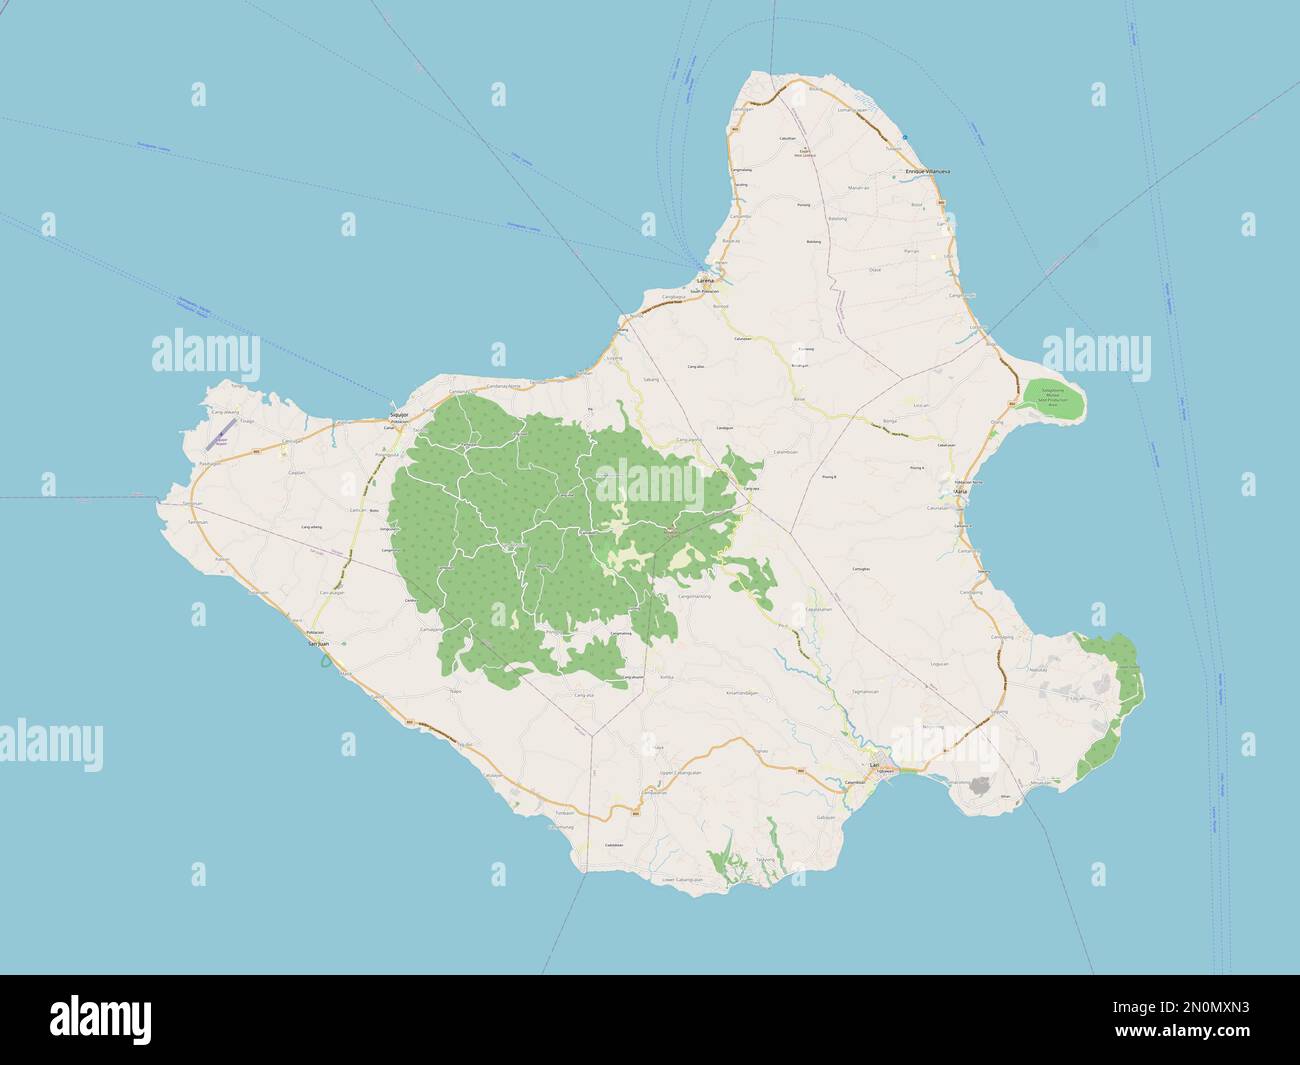 Siquijor, province of Philippines. Open Street Map Stock Photo